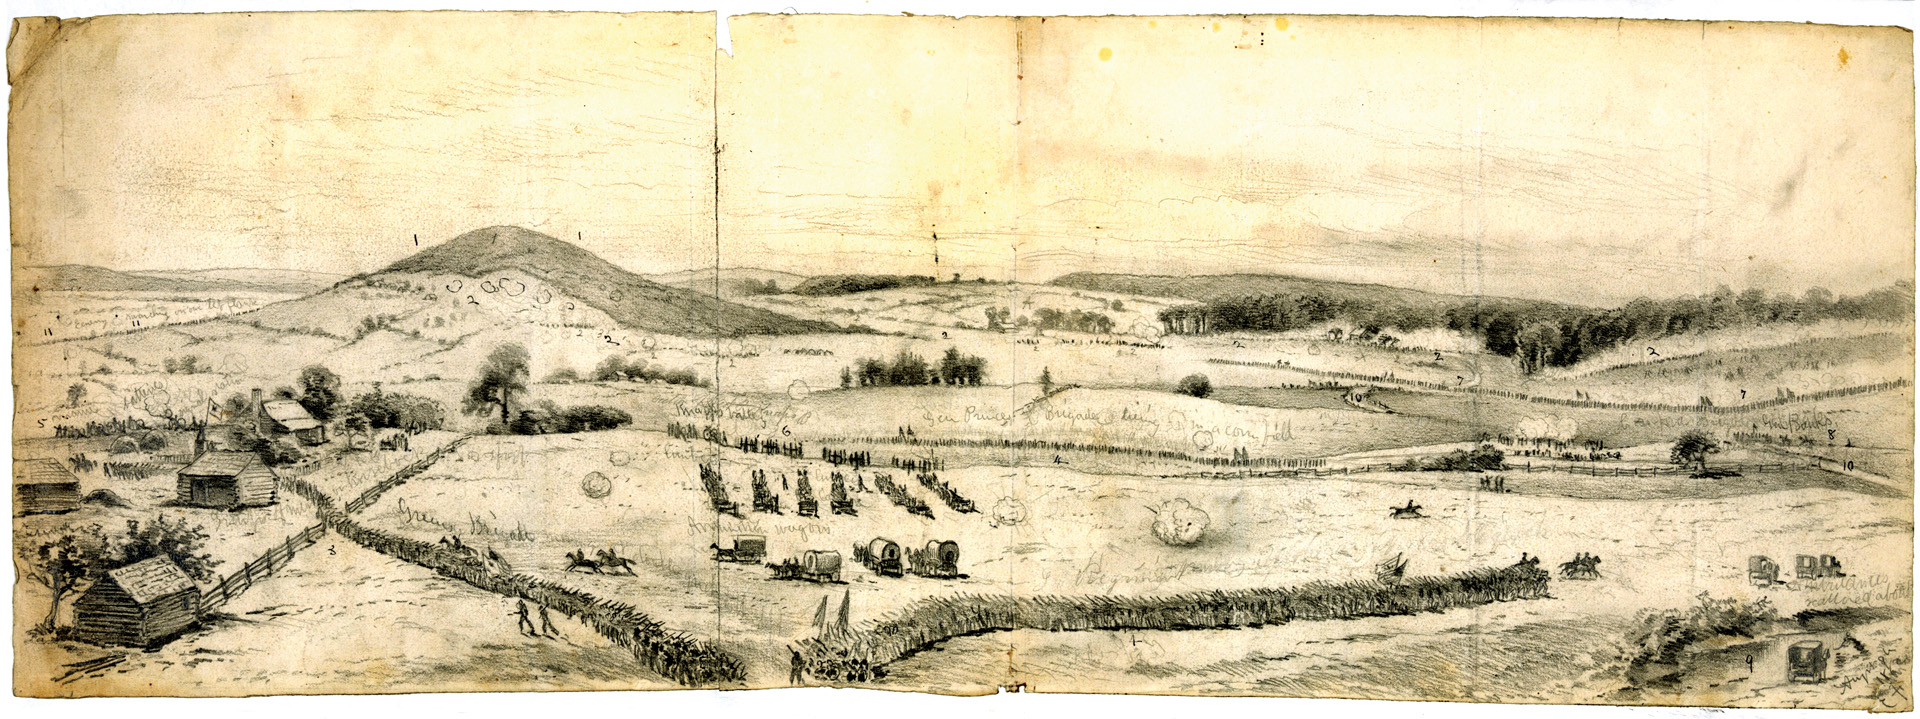 Brig. Gen. Alpheus S. Williams’ Federal division advances at the outset of the battle in war artist Edwin Forbes’ panorama of the battlefield. The Confederate battle line rested on the woods north of the Culpeper Road at top right.